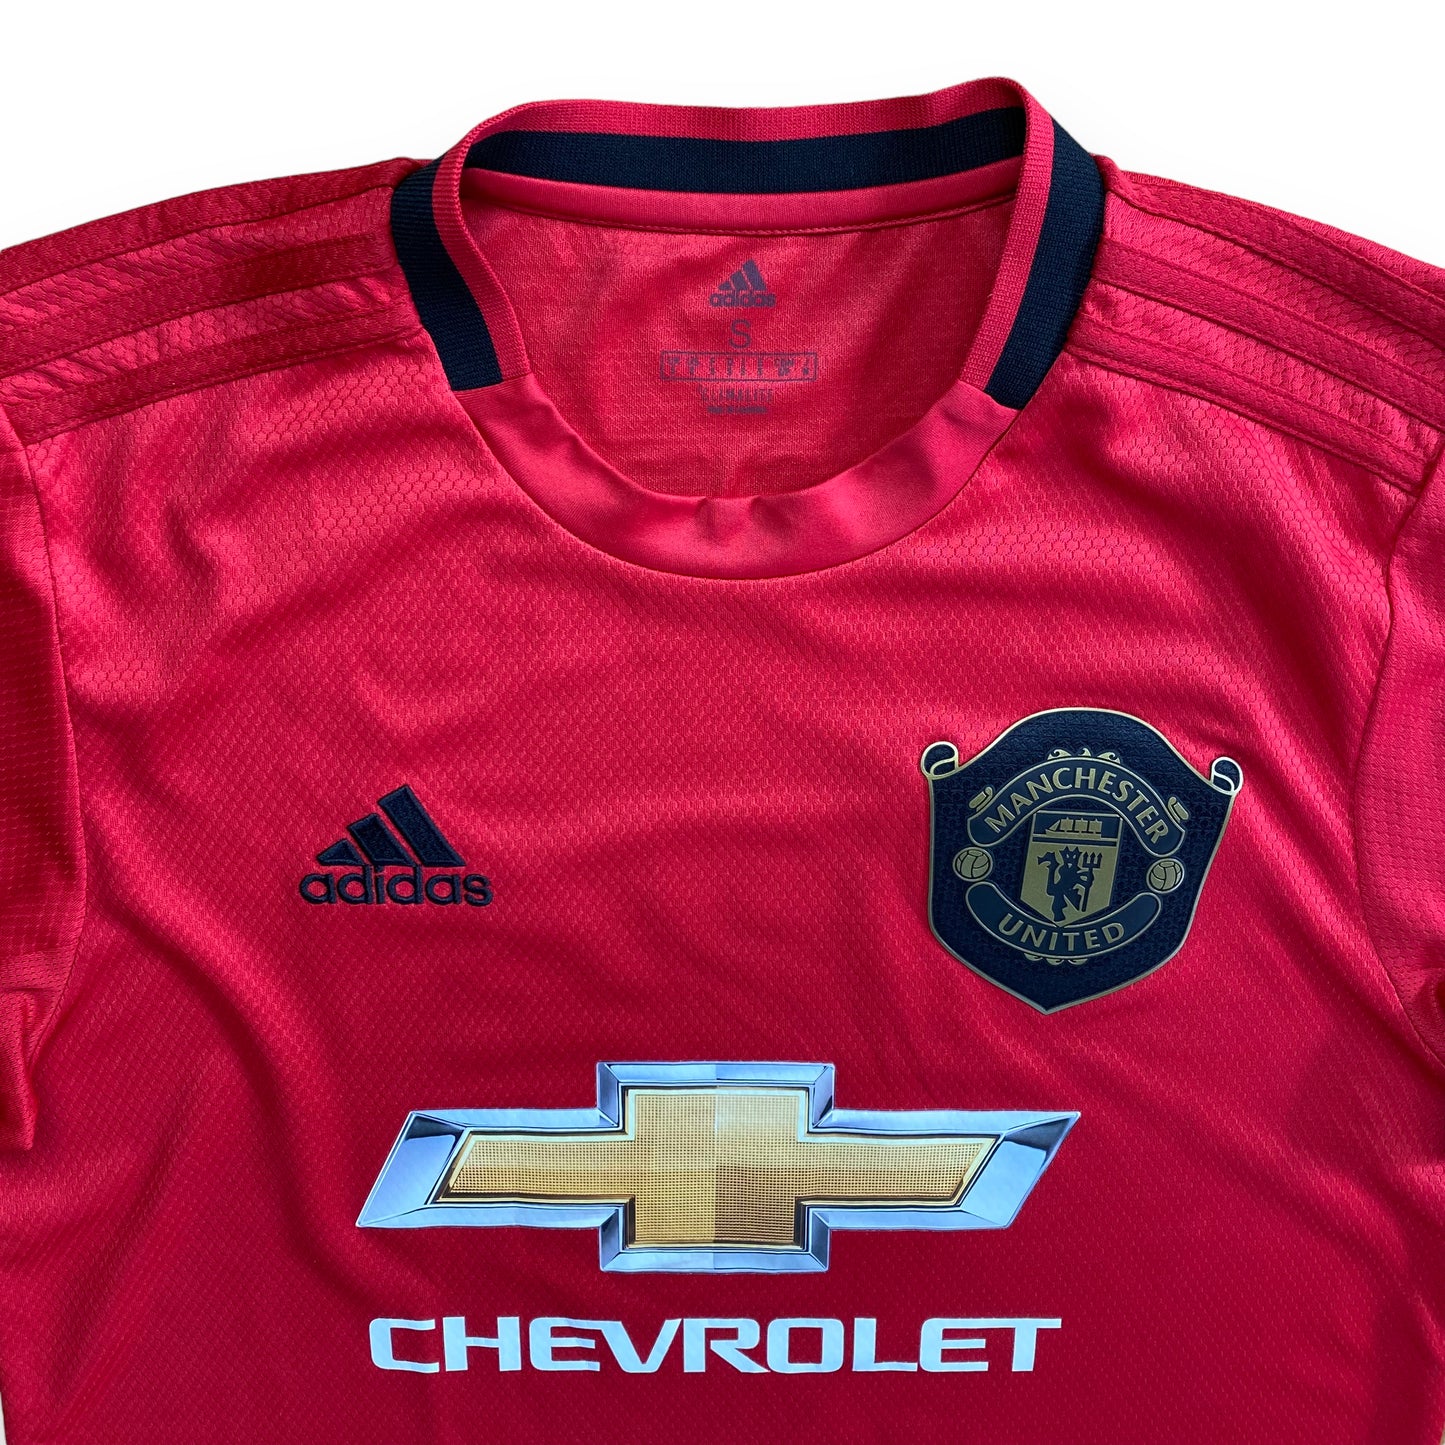 Manchester United 2019-20 Home Shirt (S) Martial #9